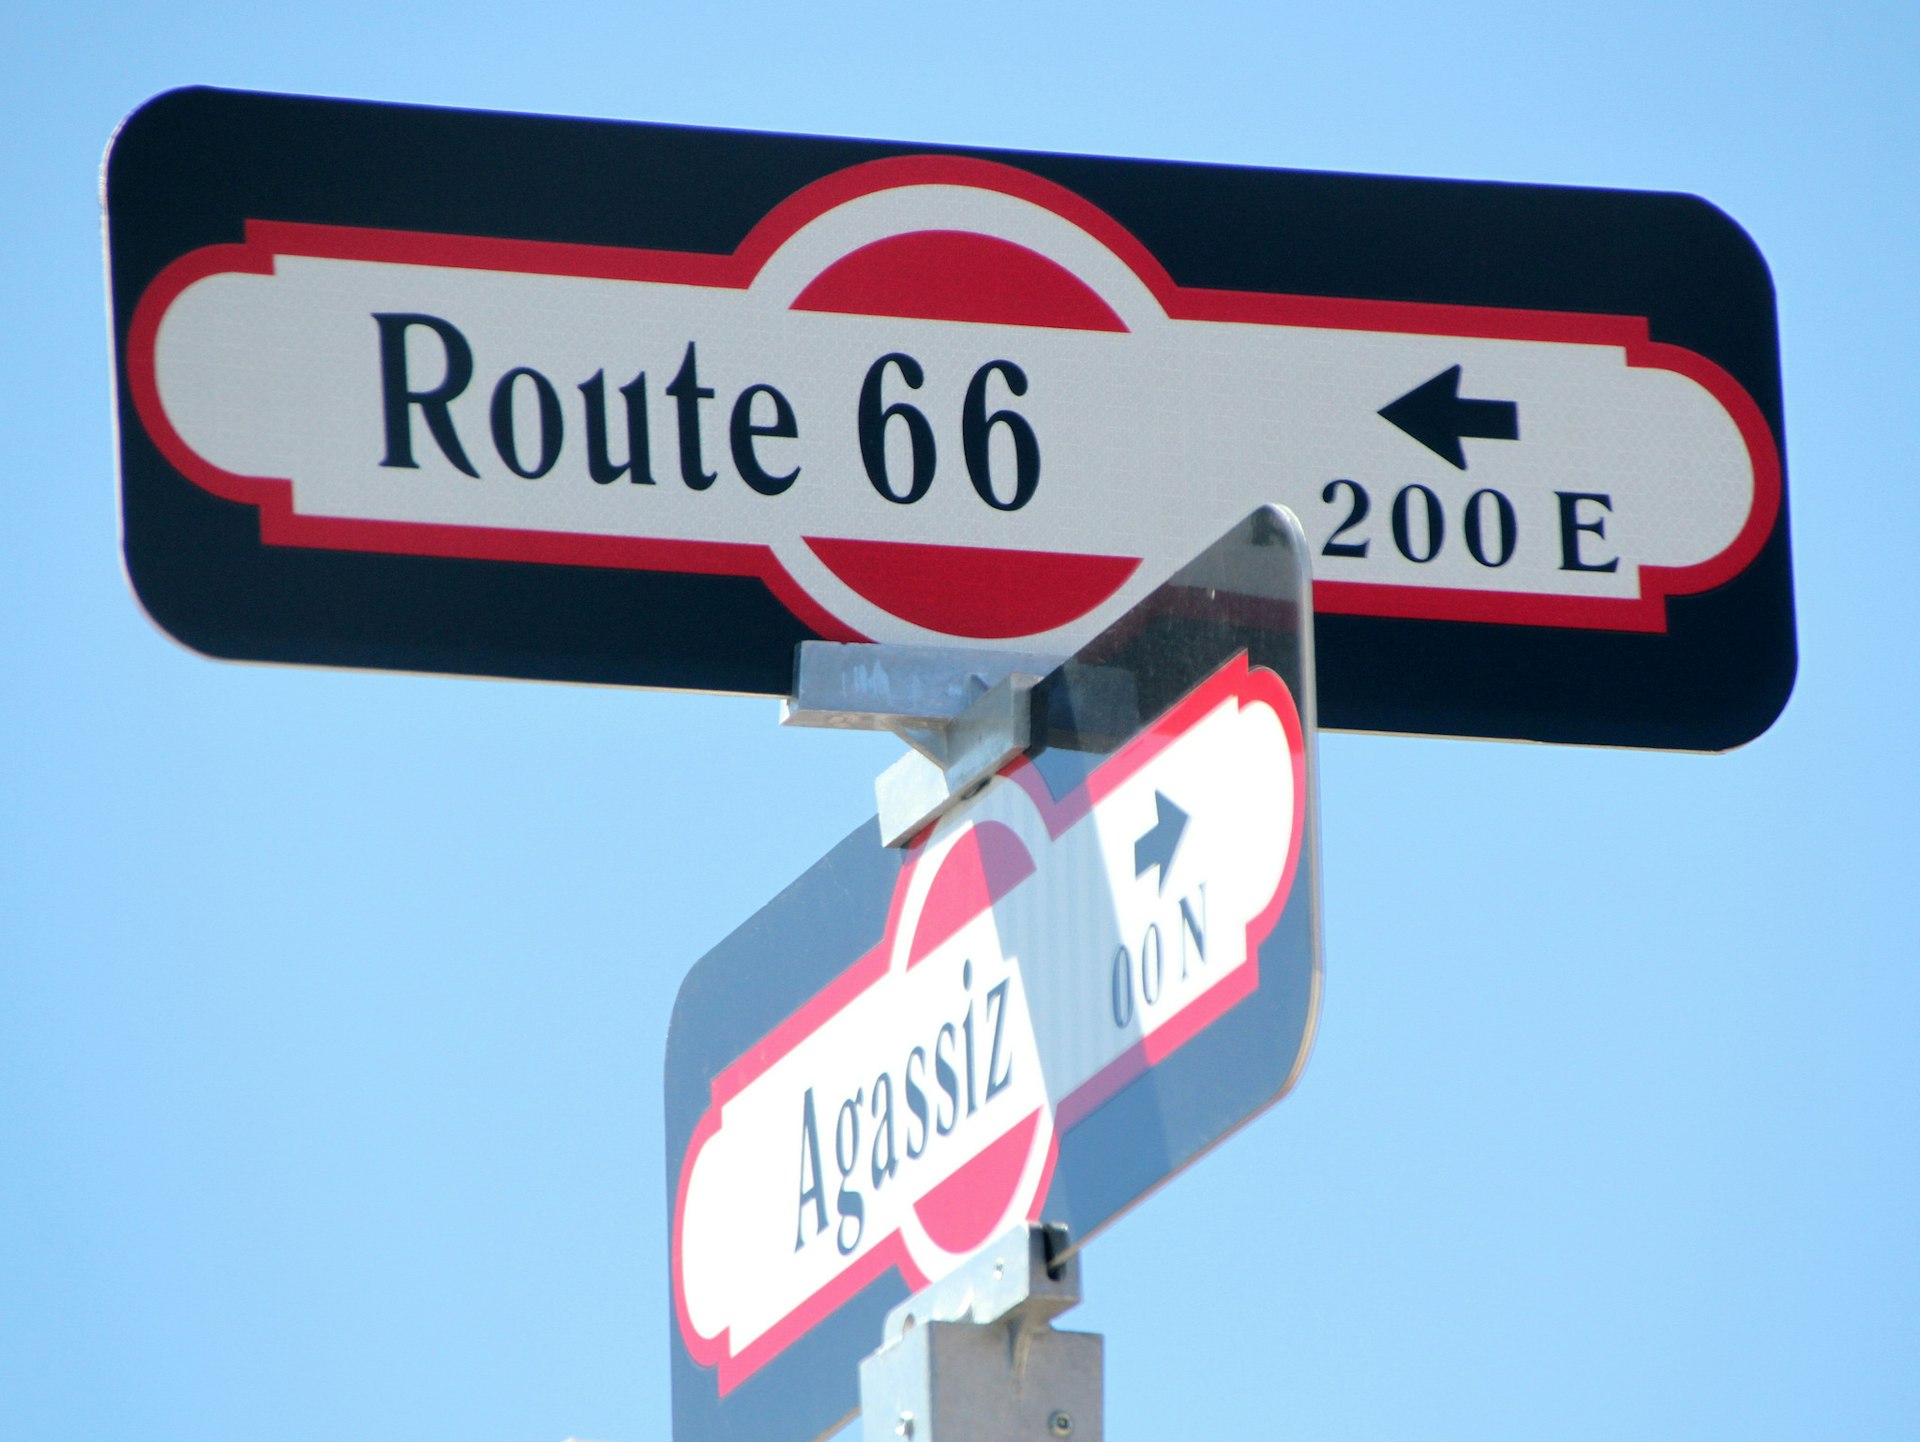 Historic Route 66 signs in Flagstaff. Image by Tony Hisgett / CC BY 2.0